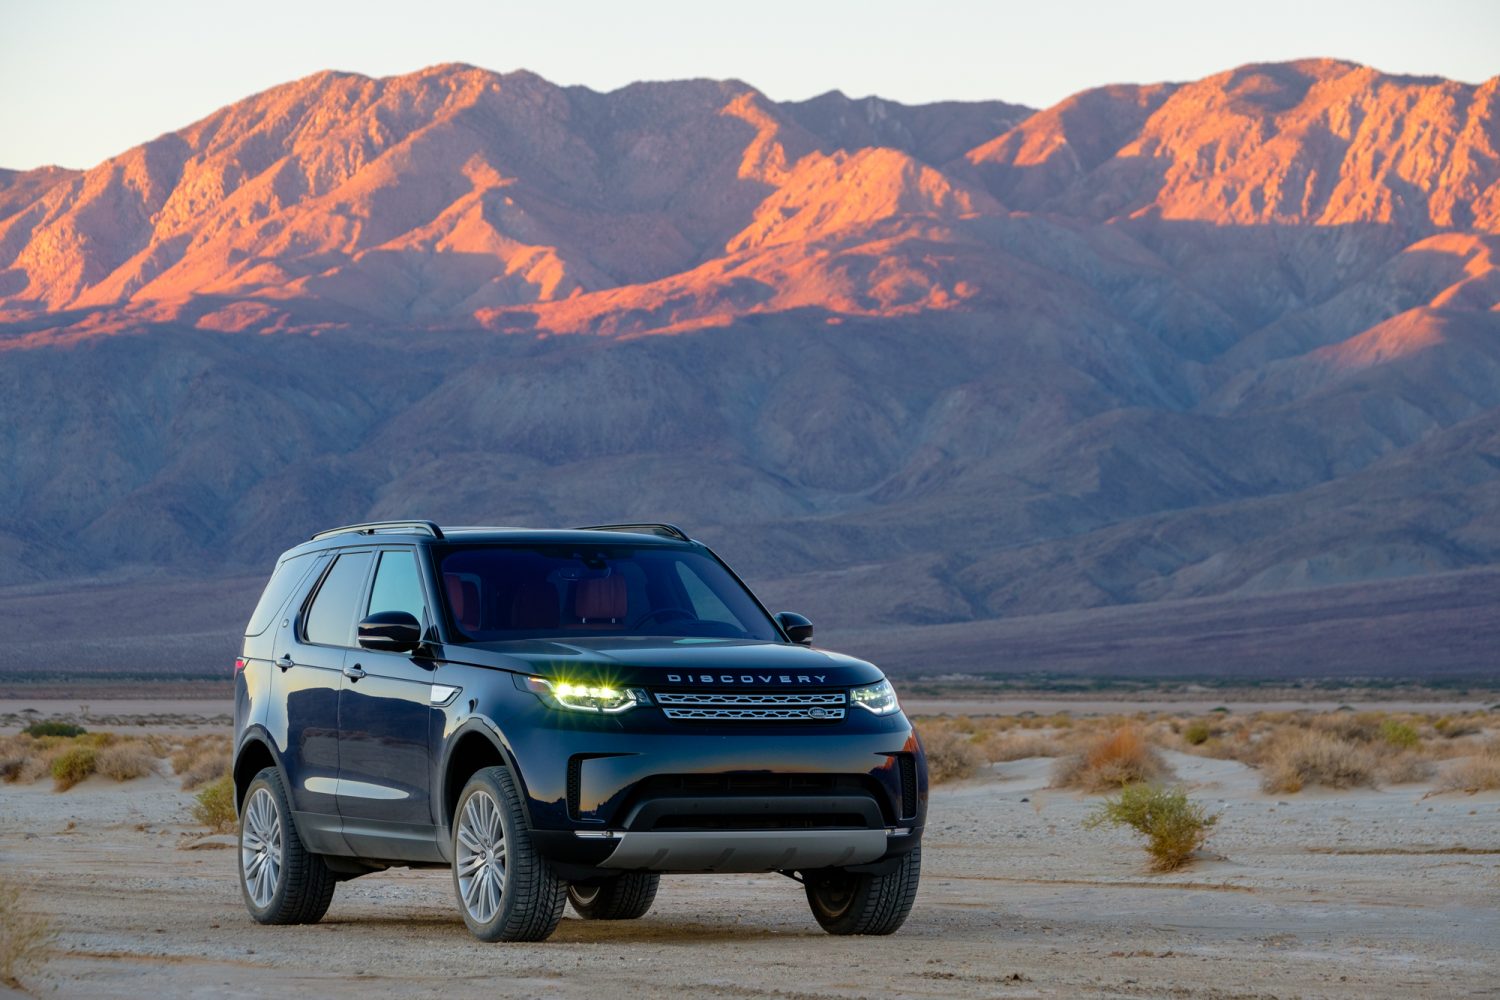 Field Tested: Land Rover Discovery 5 - Expedition Portal